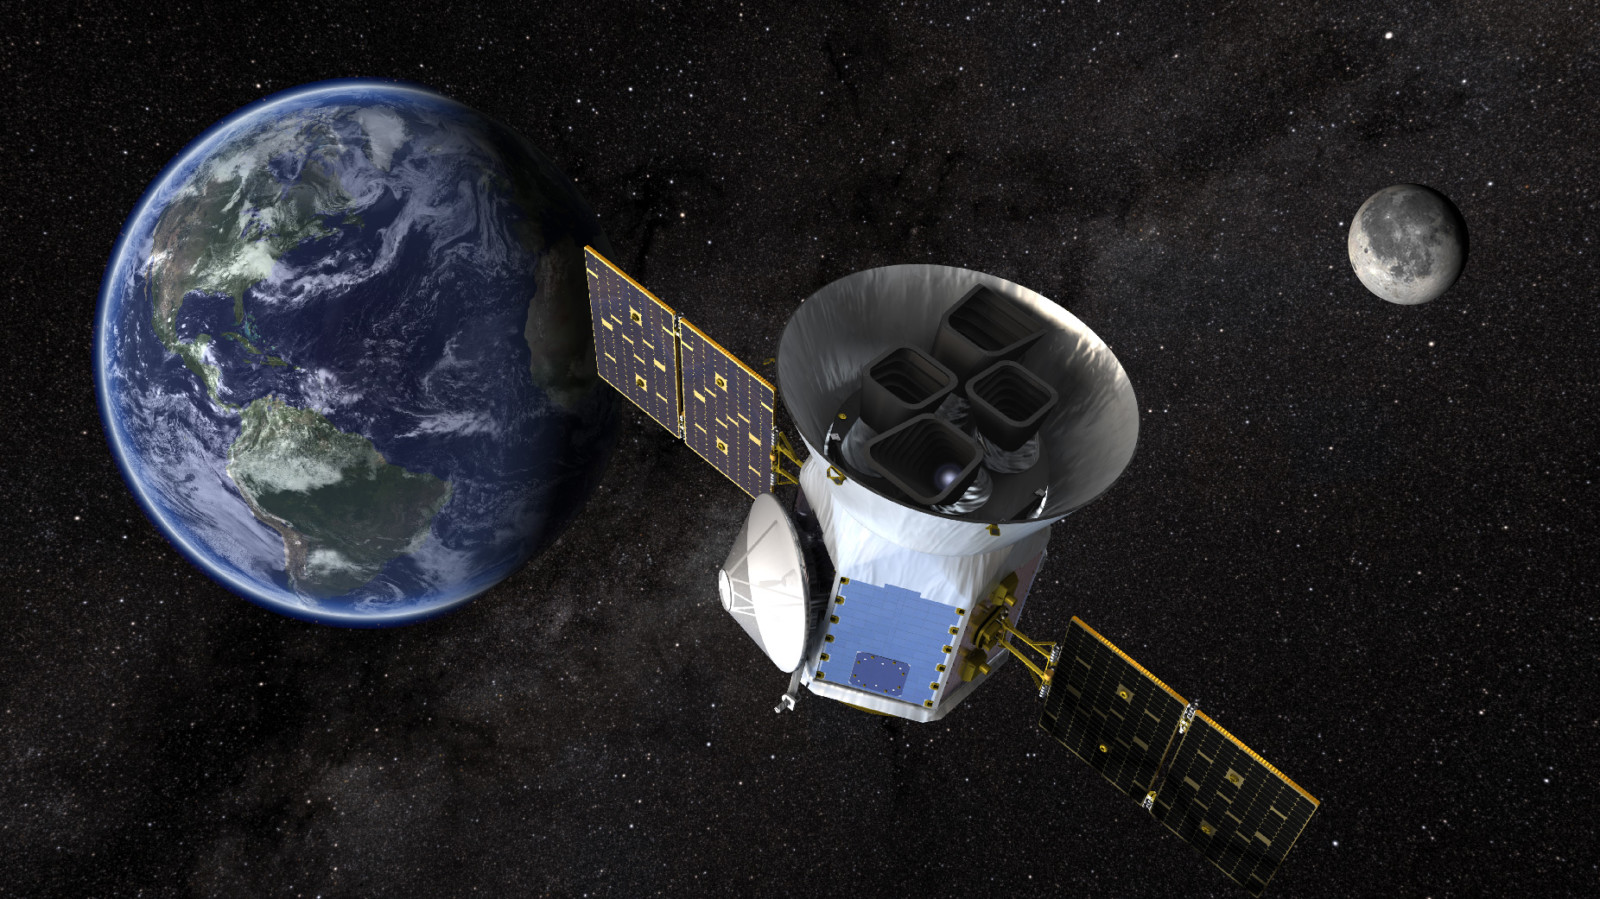 TESS targets launch in March 2018 Nevada NASA Programs